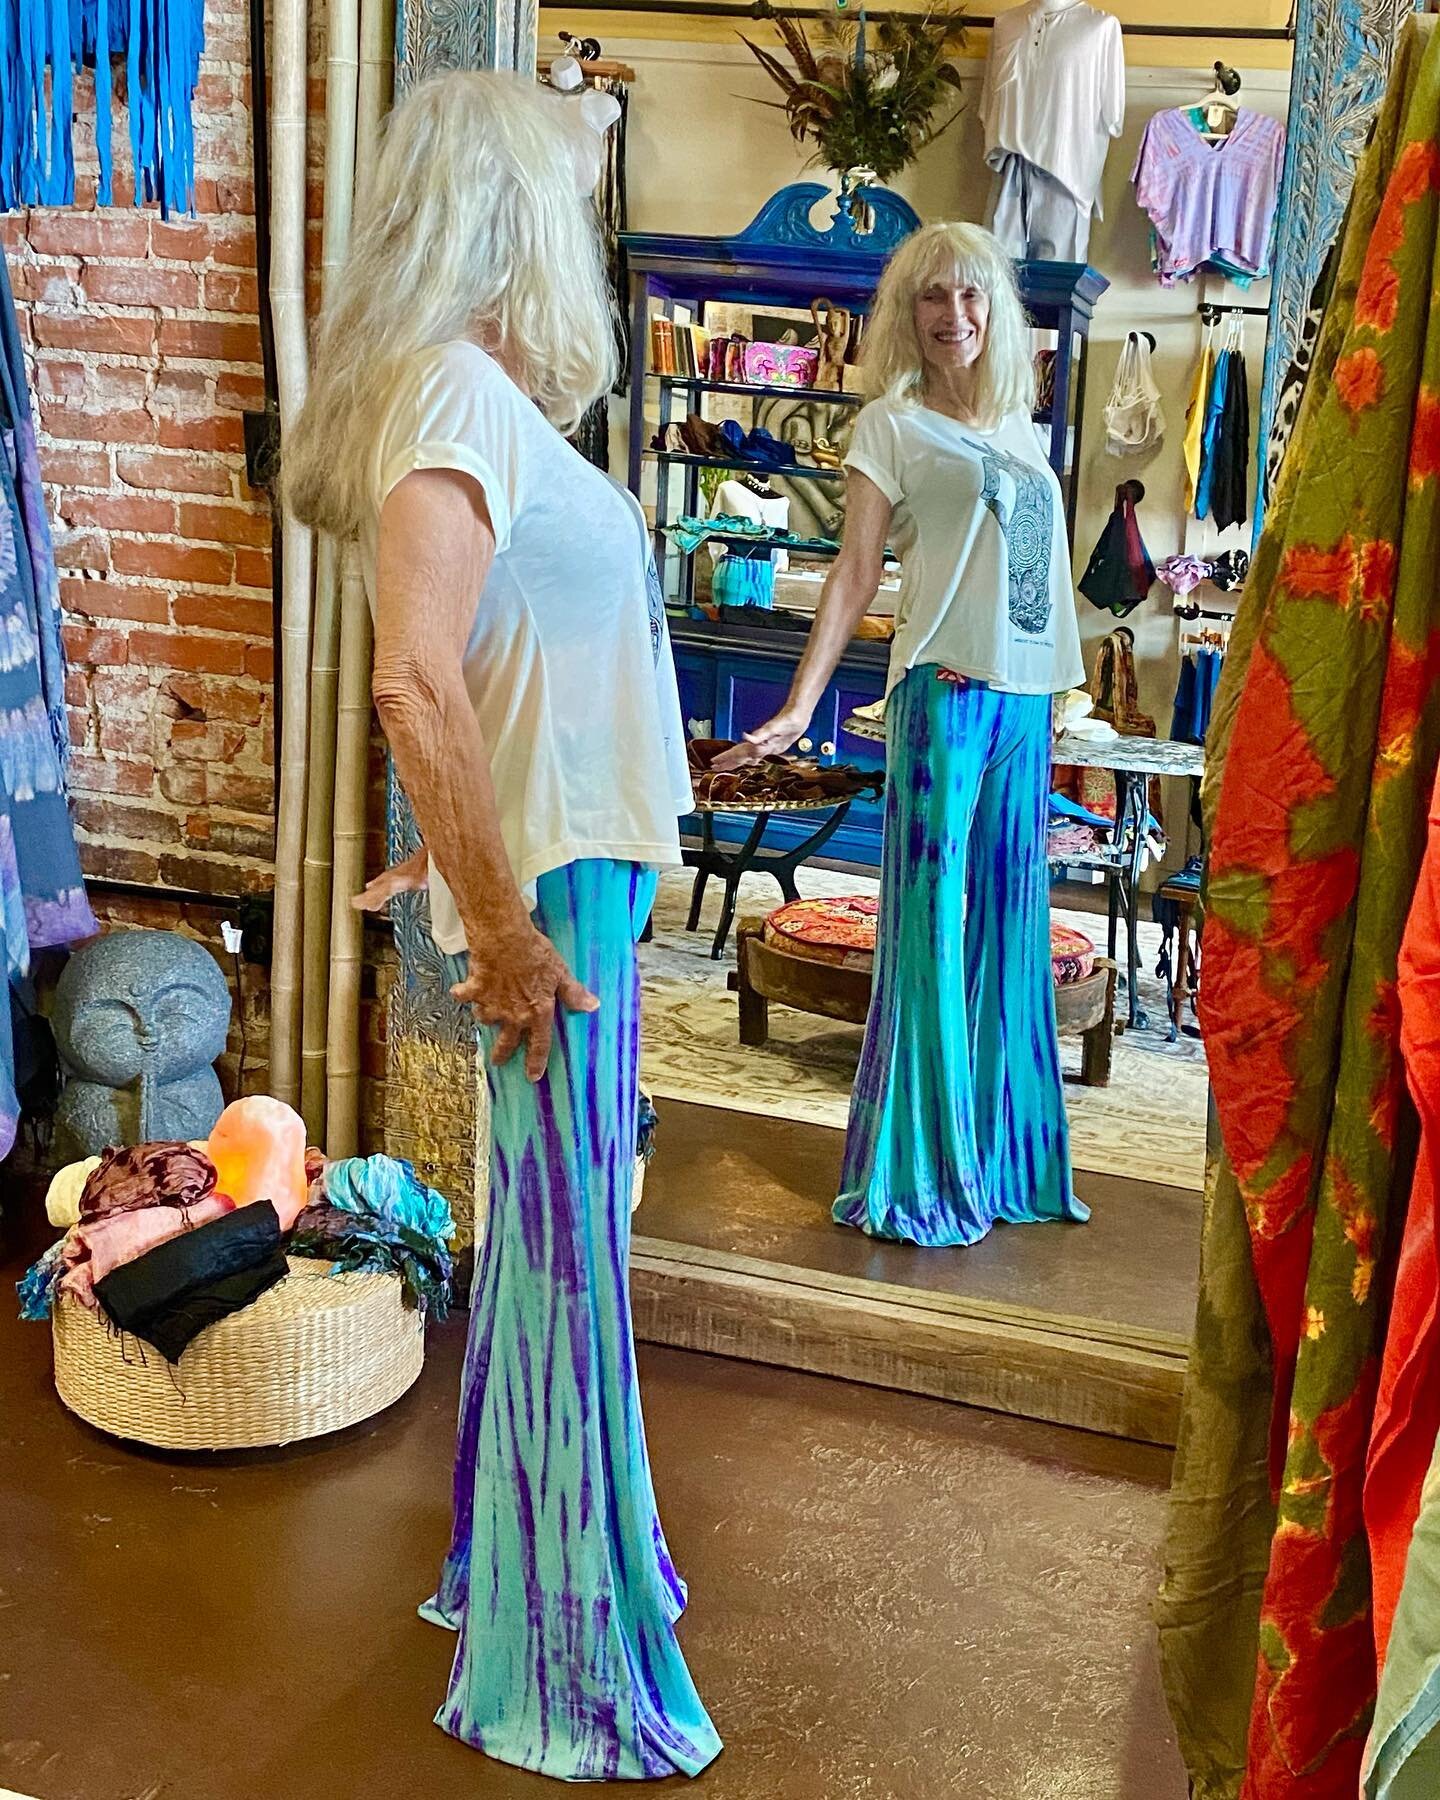 🦋a Goddess graced us with her presence✨ and wisdom 💫 while shopping with us!
She came in to treat herself to a new birthday wardrobe as she will be turning 87 years young on Saturday!

She bought our new Tie Dye &ldquo;Annie B&rdquo; Bellbottoms...